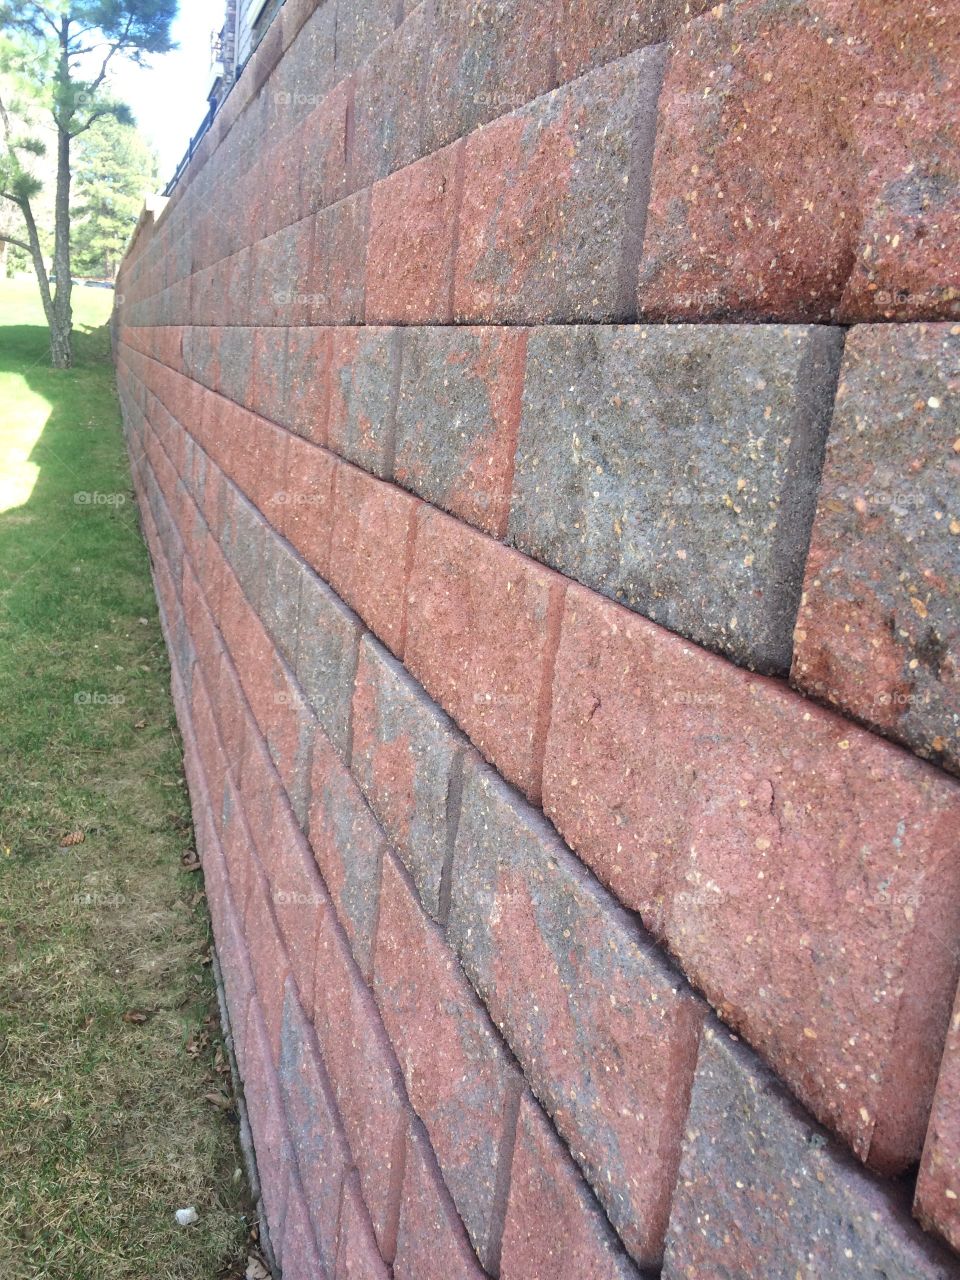 Retaining wall in the park